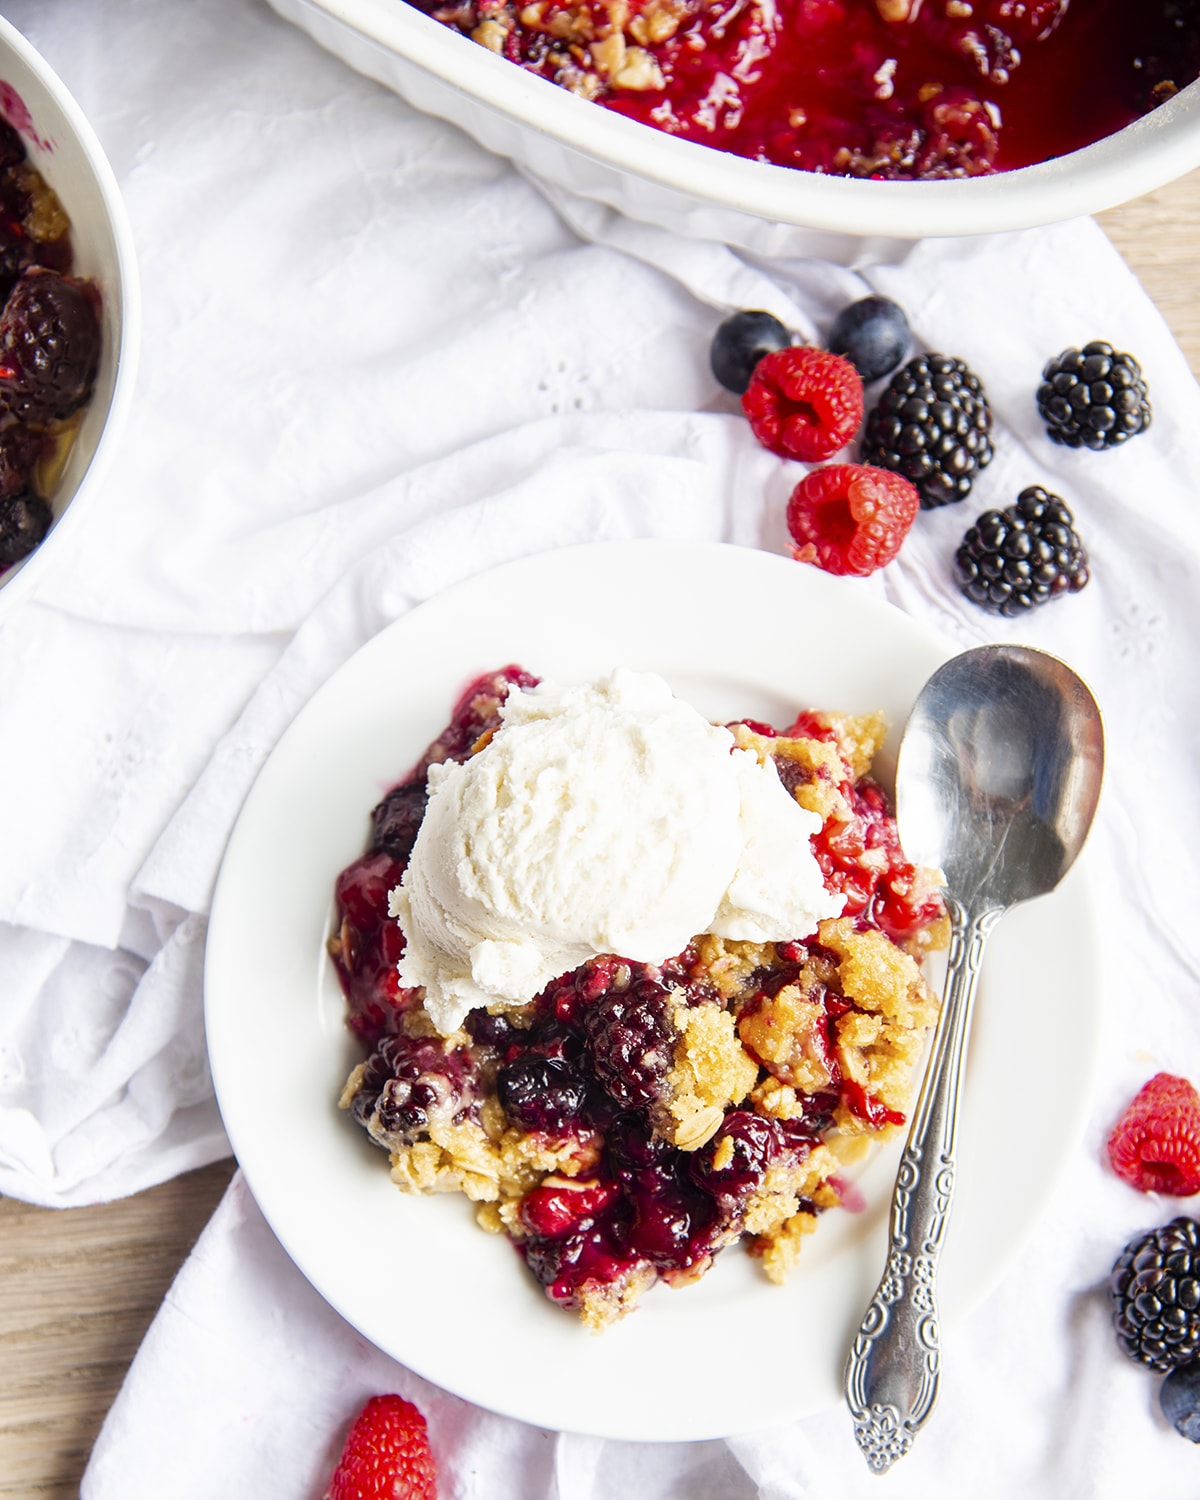 An overhead photo of berry crumble with ice cream on top.